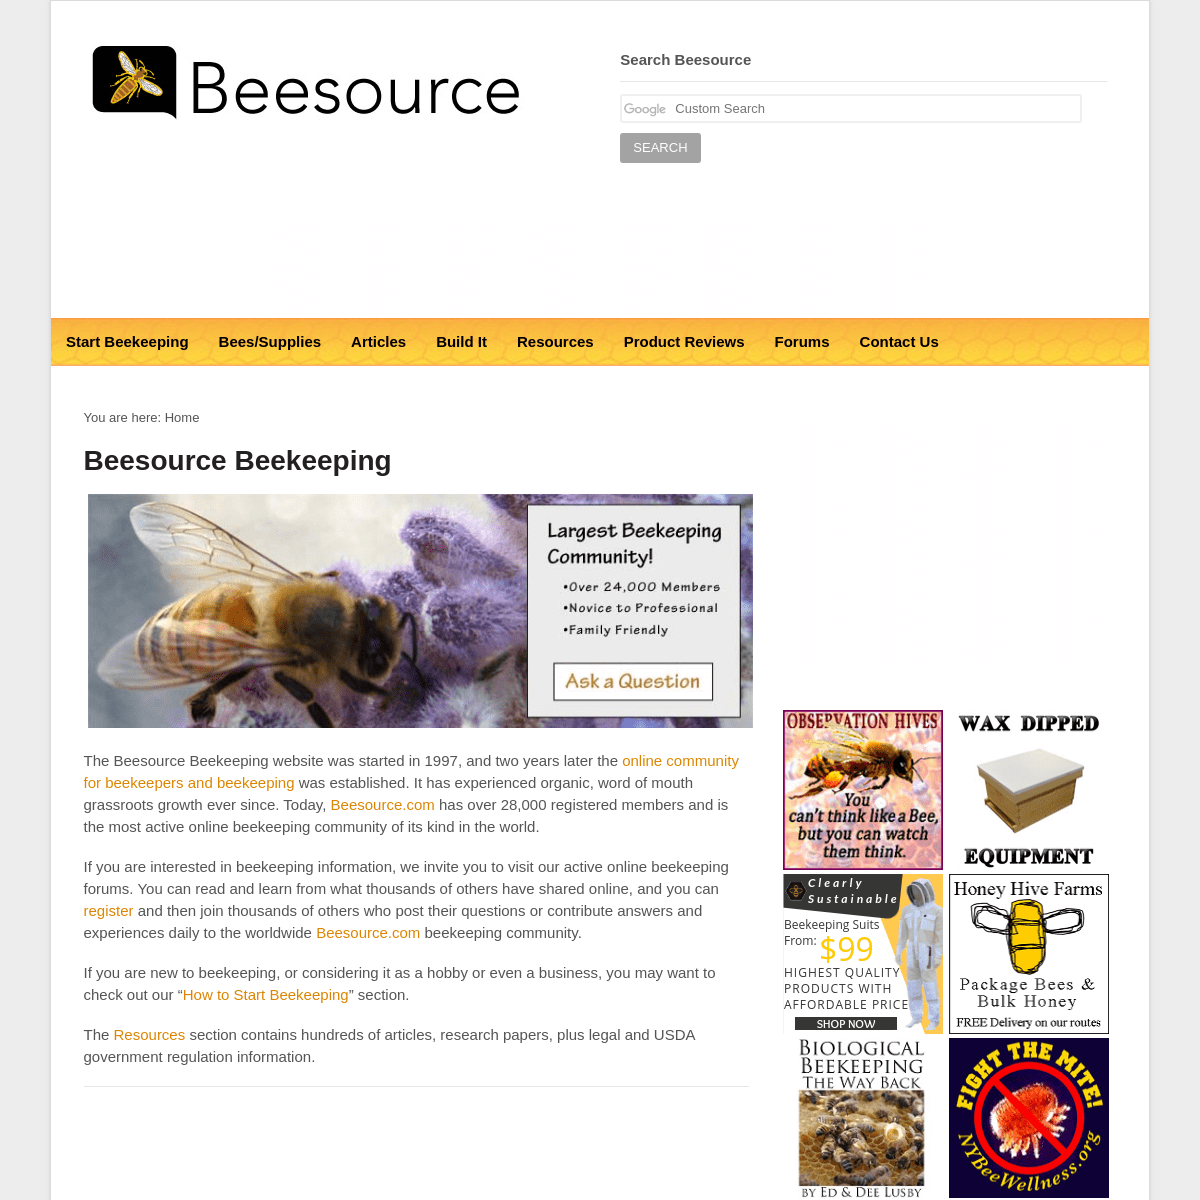 A complete backup of beesource.com